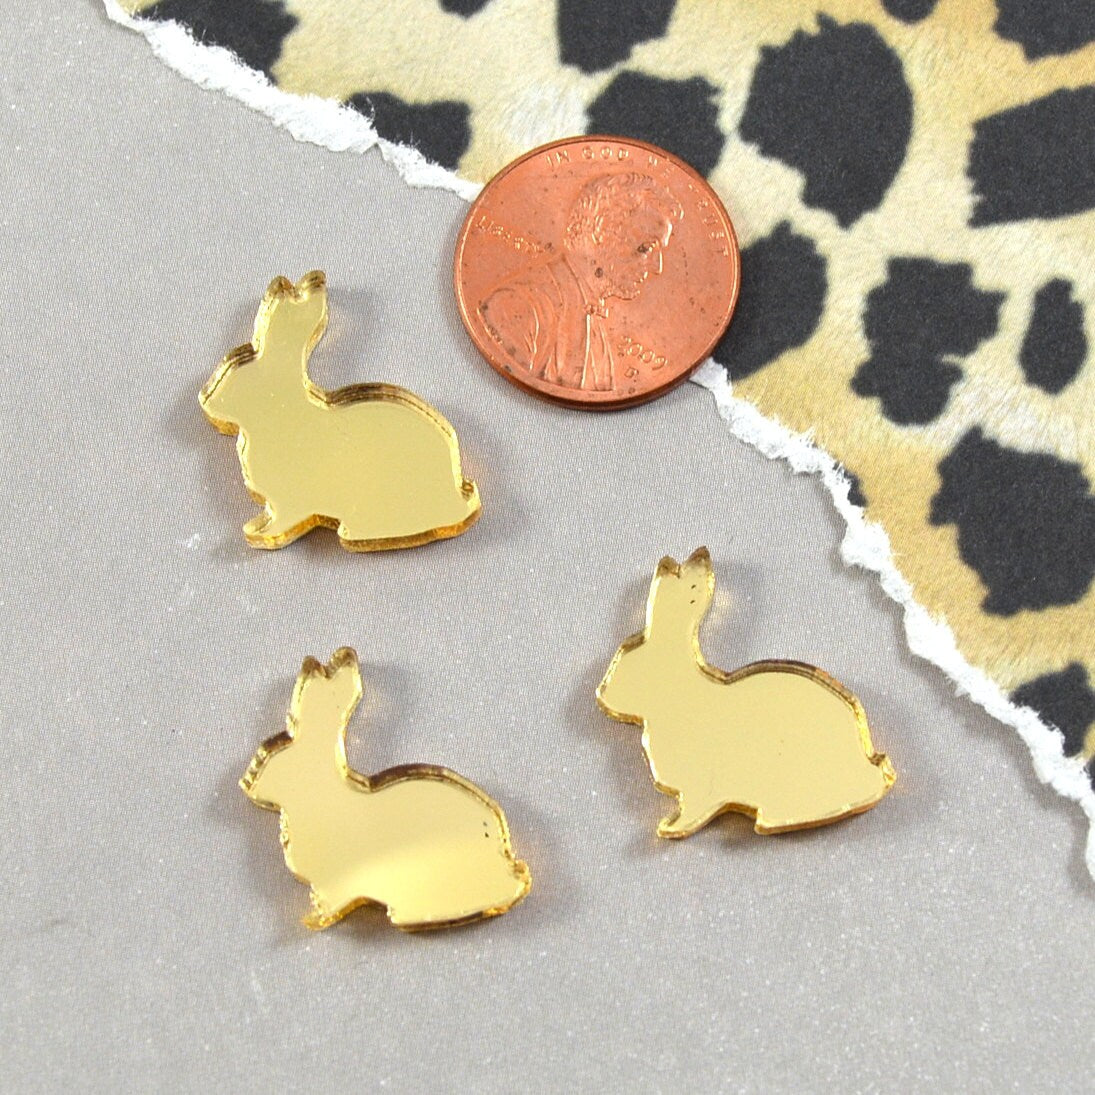 GOLD MIRROR BUNNIES Laser Cut Acrylic Cabochons Set of 3 Cabs